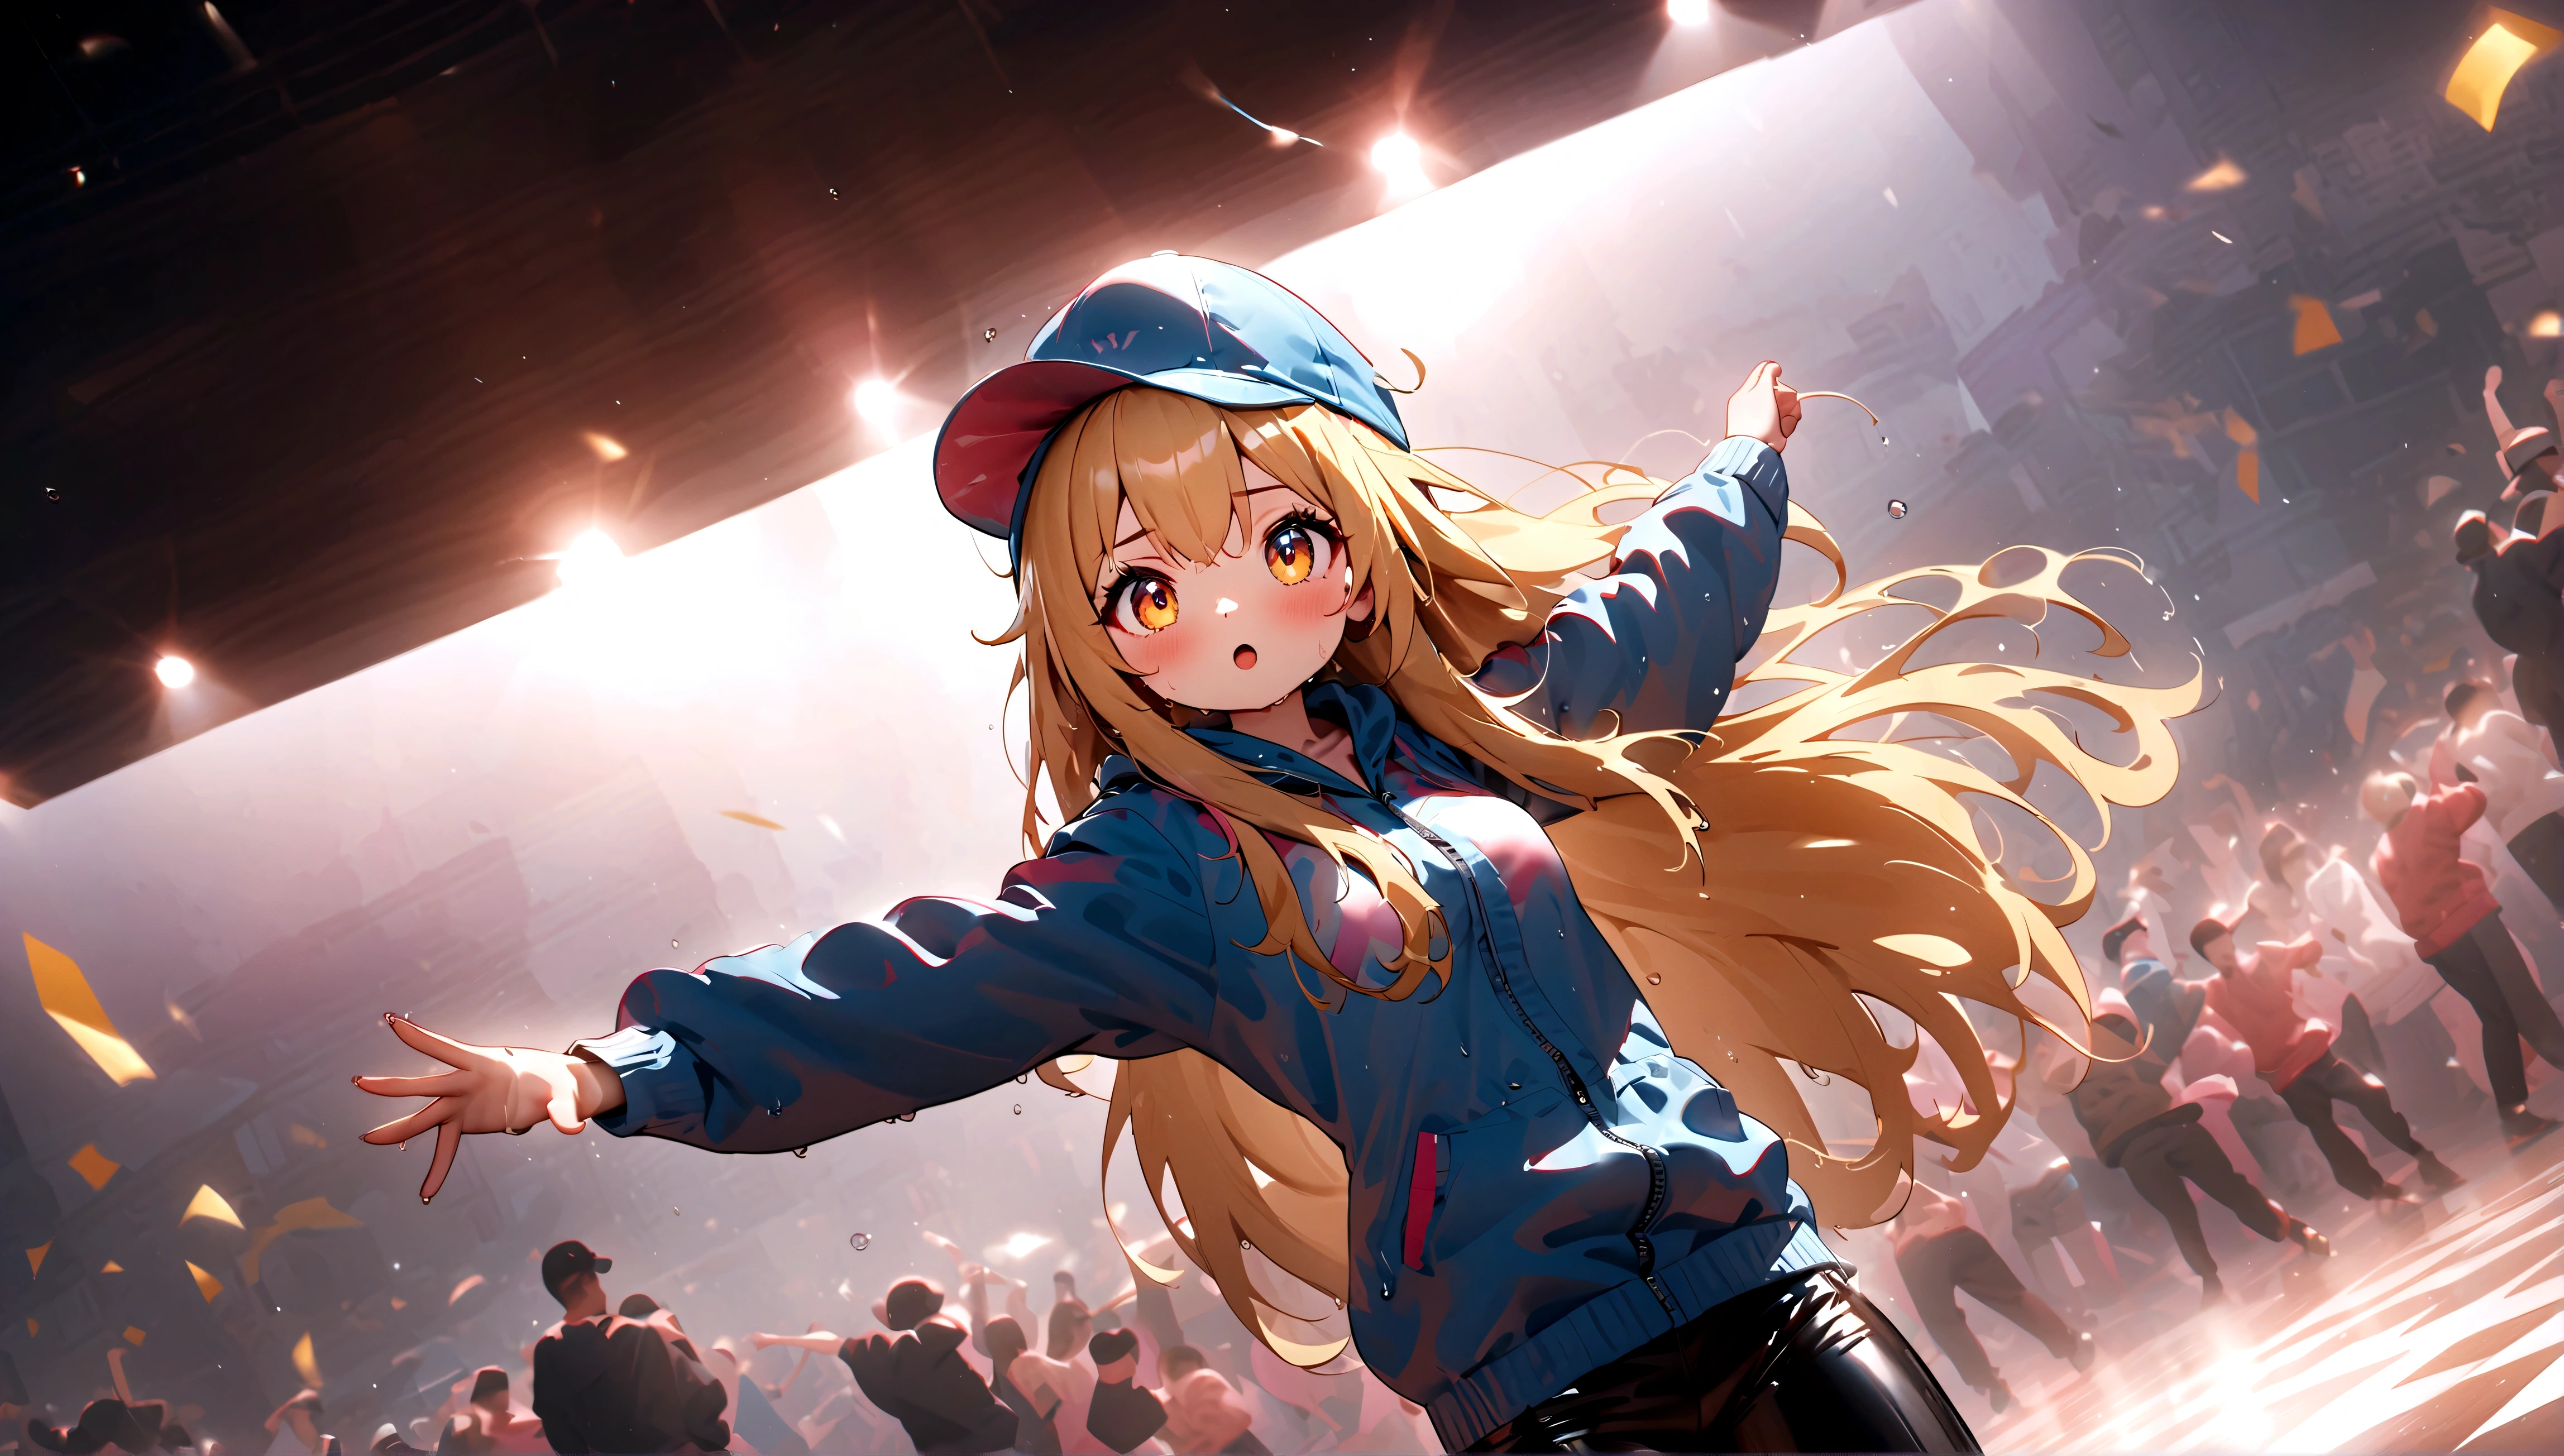 quality\(8k,wallpaper of extremely detailed CG unit, ​masterpiece,hight resolution,top-quality,top-quality real texture skin,hyper realisitic,increase the resolution,RAW photos,best qualtiy,highly detailed,the wallpaper,cinematic lighting,ray trace,golden ratio\), BREAK ,1girl\(young,long hair, blonde, brest, street fashion, hat, wet, wiping water\) is dancing breaking, heavy rain, spectators all around,street,at night,motion blur,dynamic pose,dynamic angle